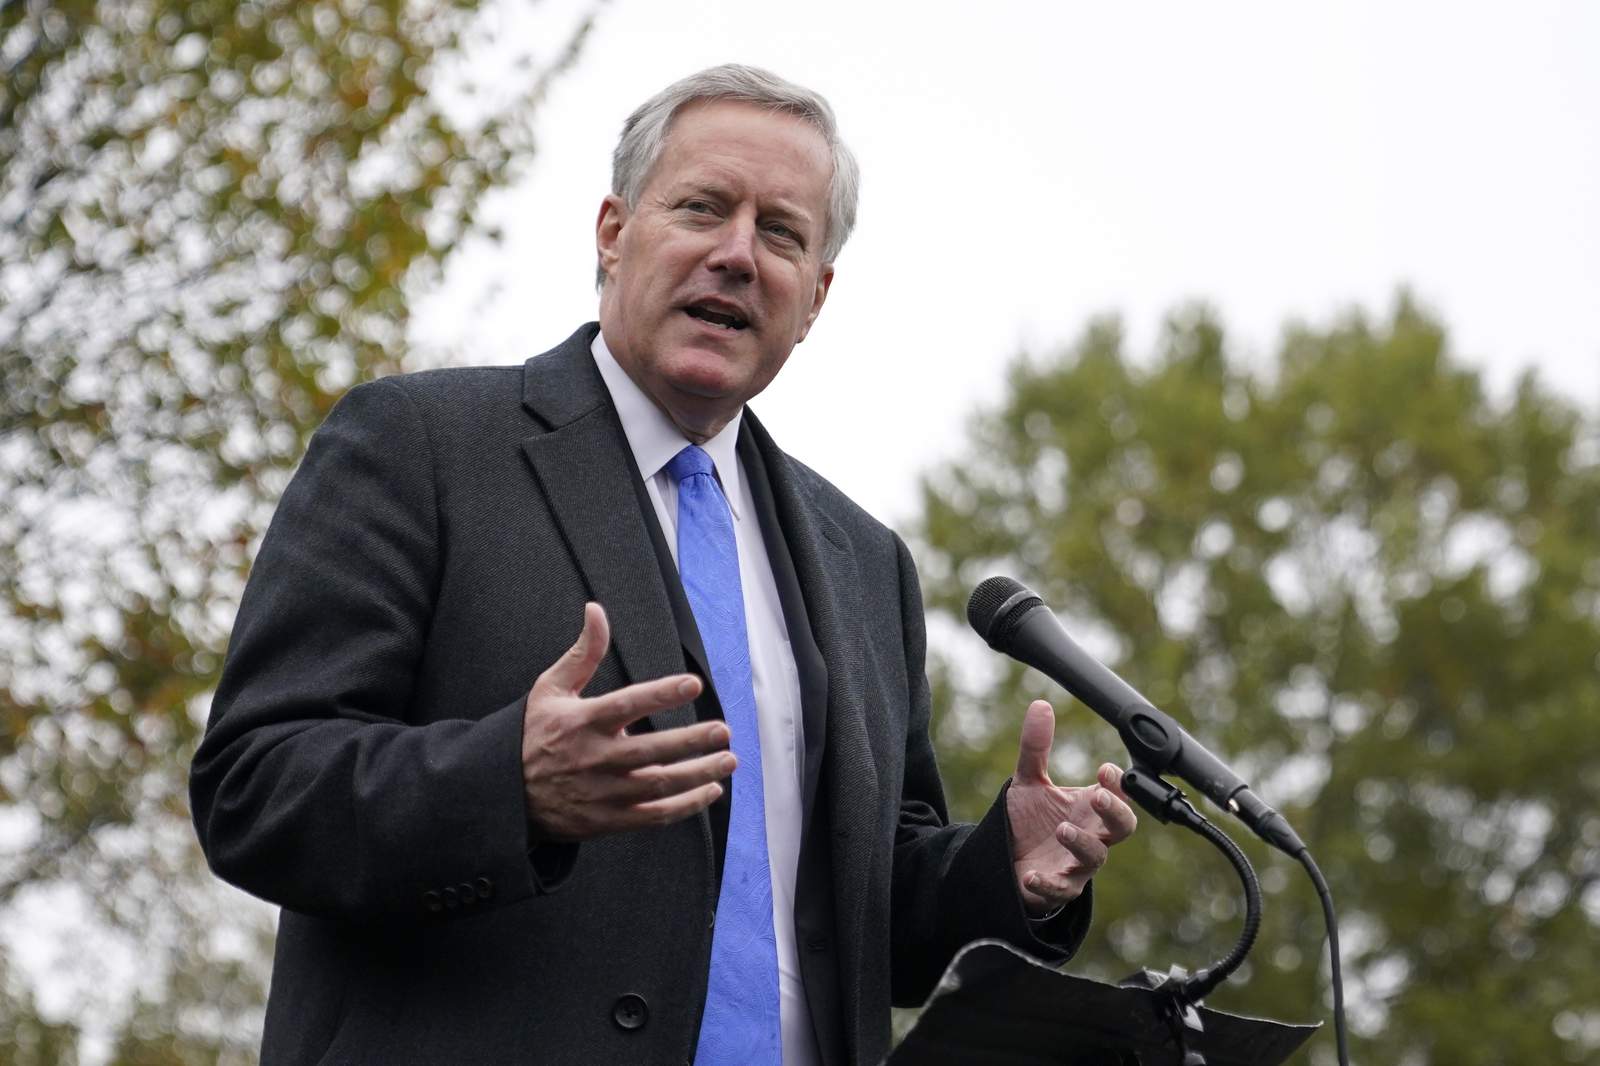 President Trump’s chief of staff Mark Meadows tested positive for COVID-19